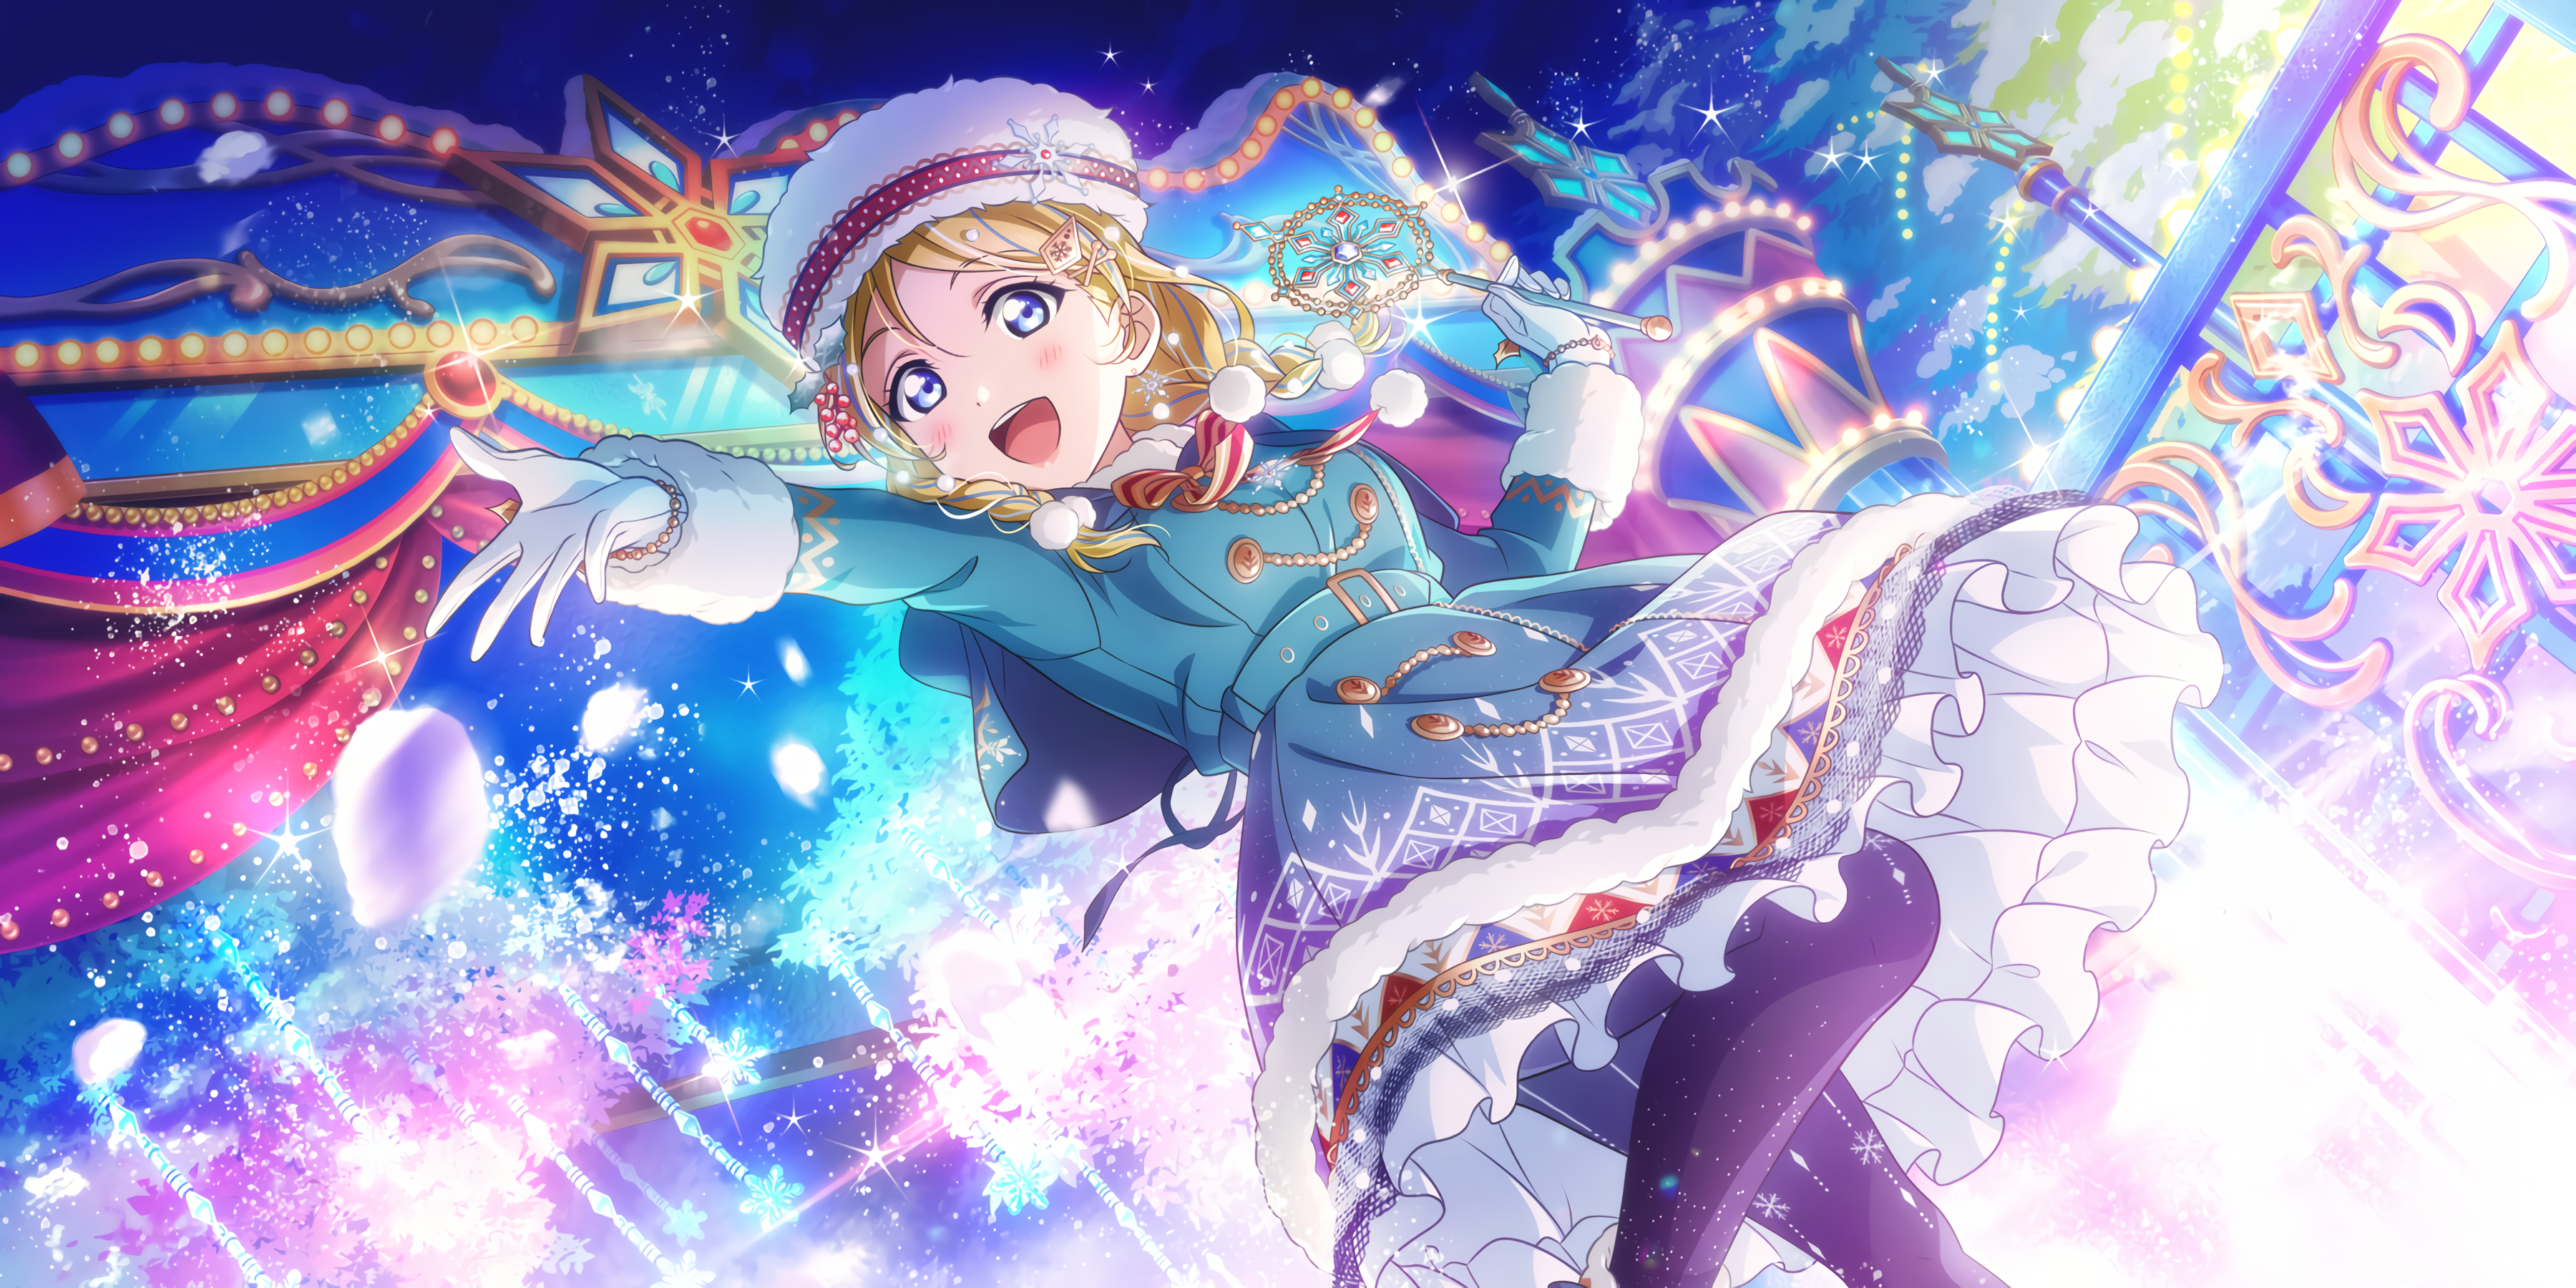 Anime 3600x1800 Ayase Eli Love Live! anime girls anime open mouth blue clothing hat women with hats